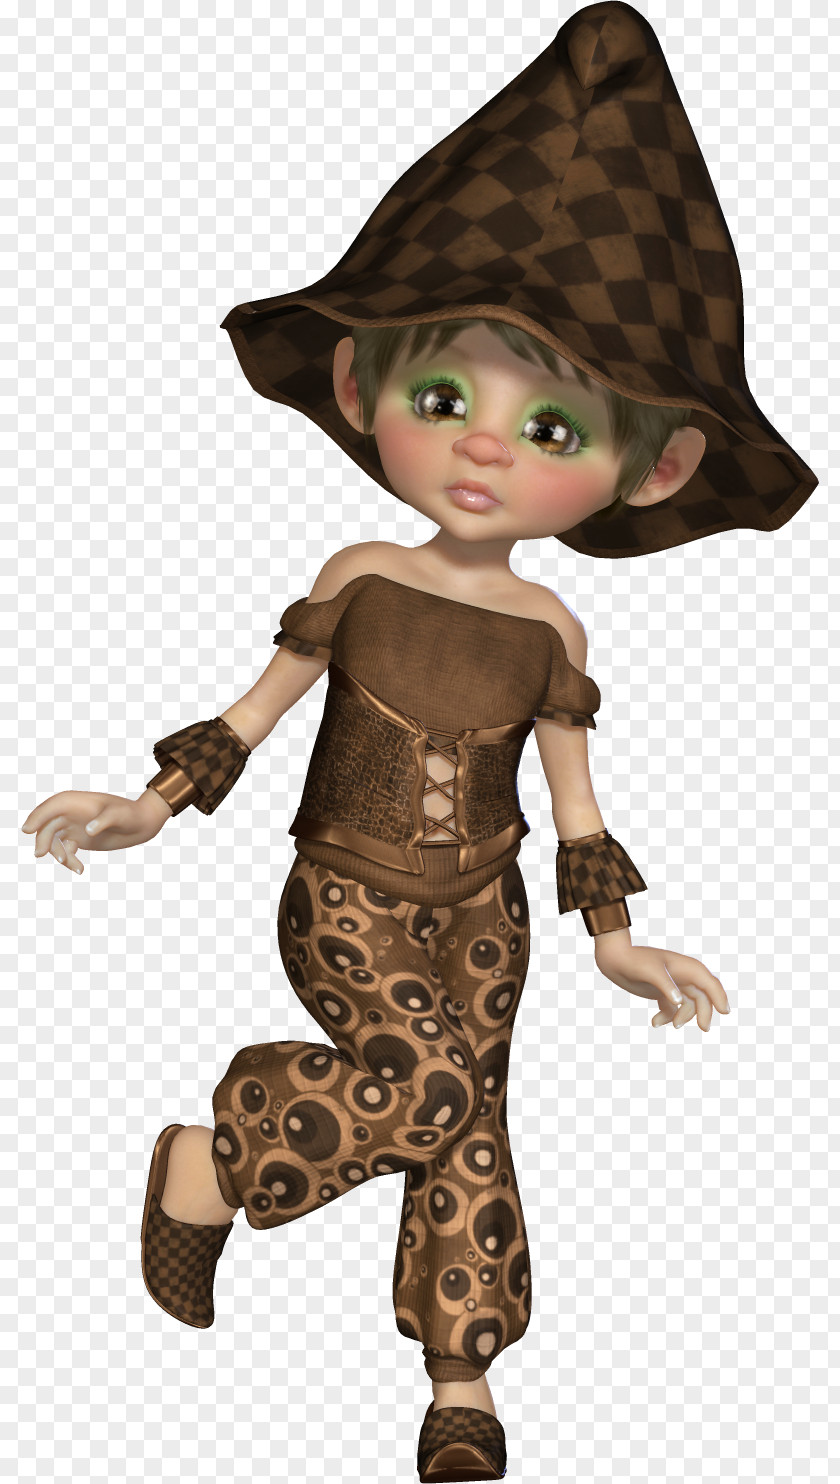 Child Doll Toddler Figurine Headgear PNG